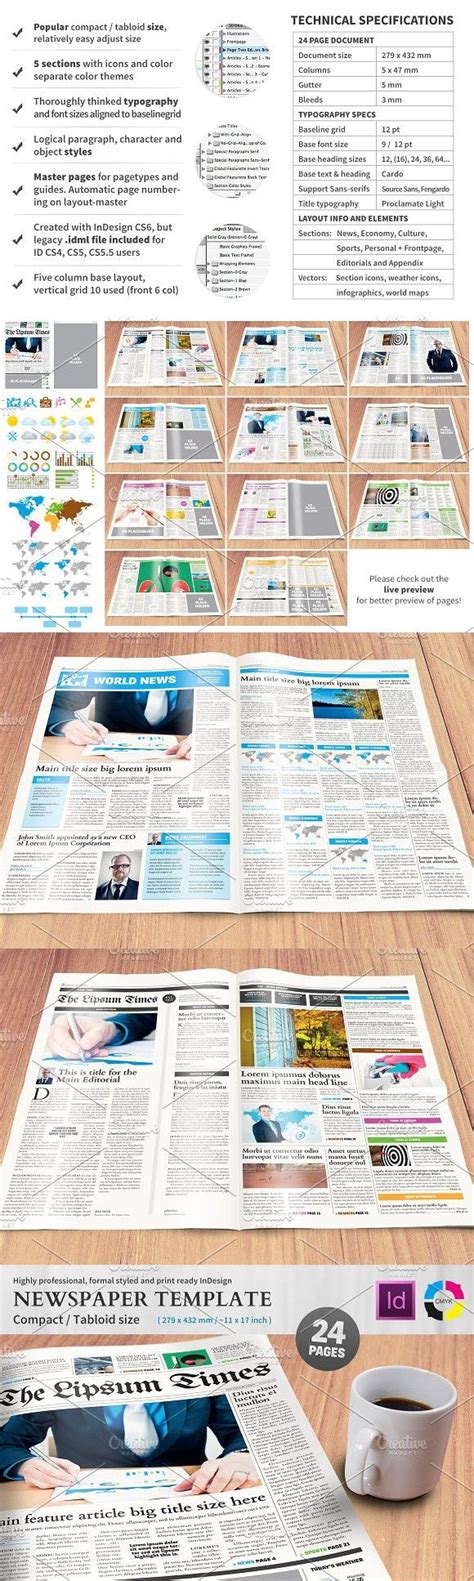 Tabloid newspaper printing is less expensive than ever at makemynewspaper. Newspaper Template - compact/tabloid | Newspaper template ...